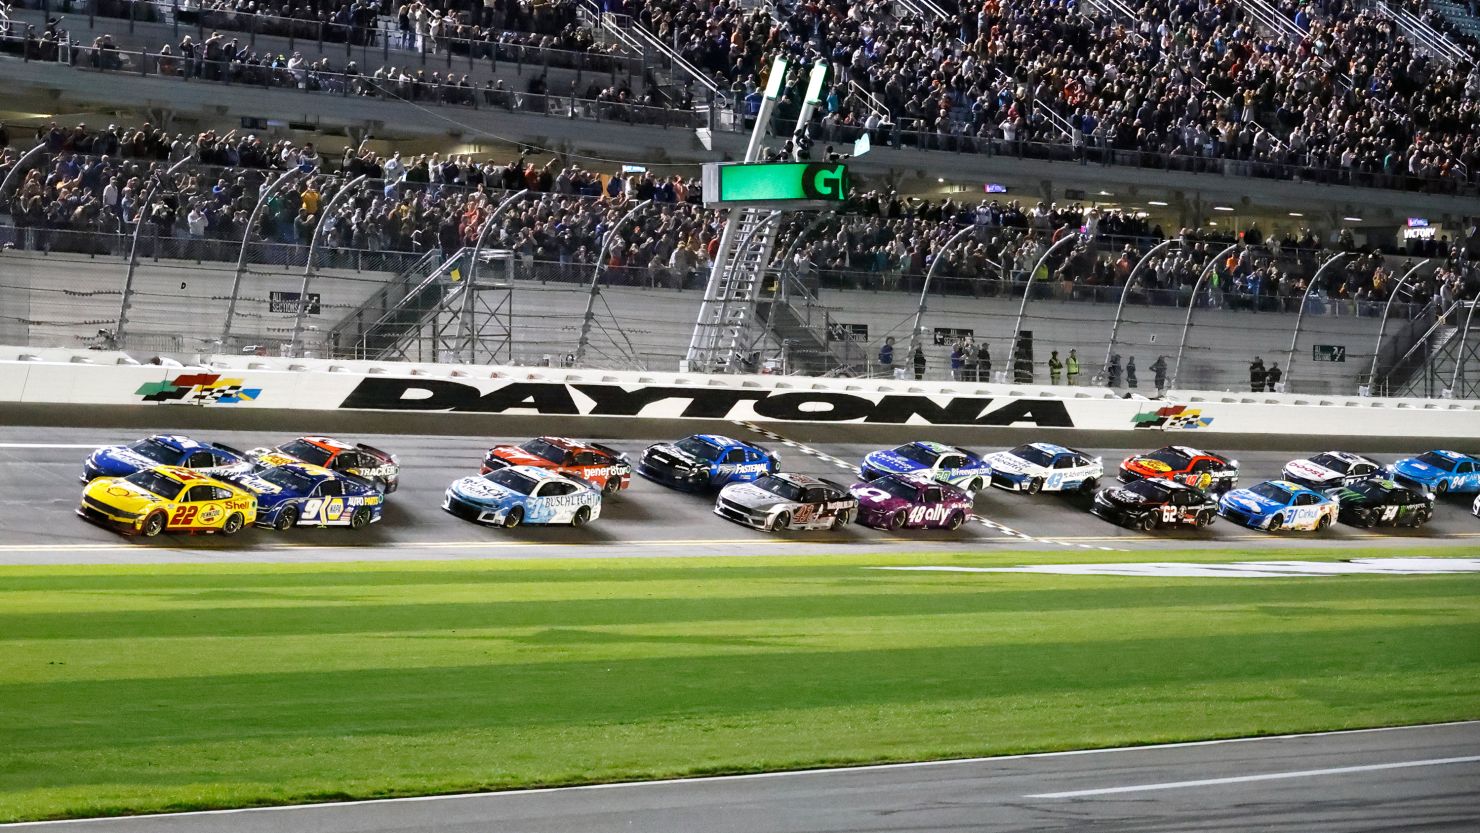 Joey Logano (22) leads the field to start the first of two Daytona 500 qualifying auto races at Daytona International Speedway on Thursday.